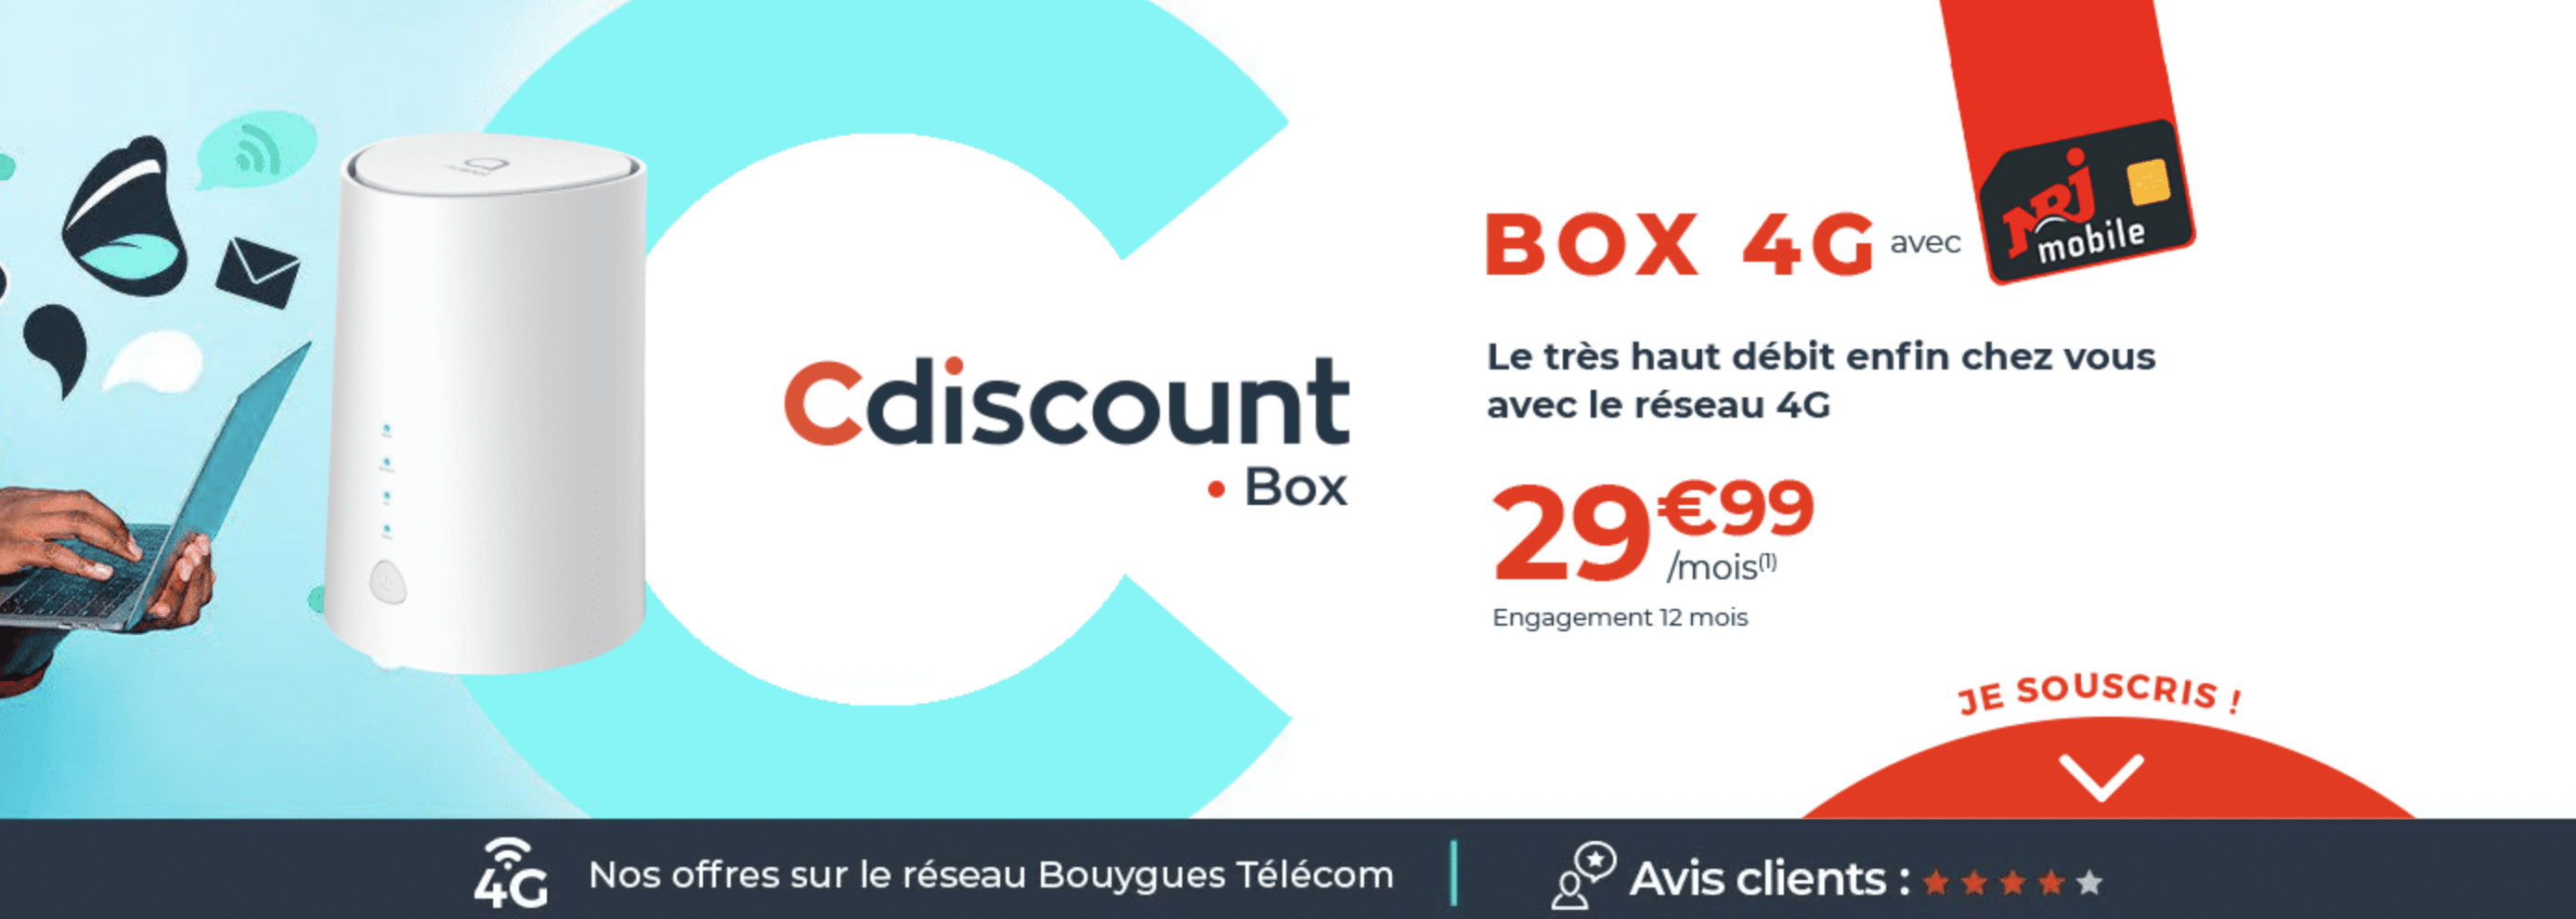 offre box 4G cdiscount mobile